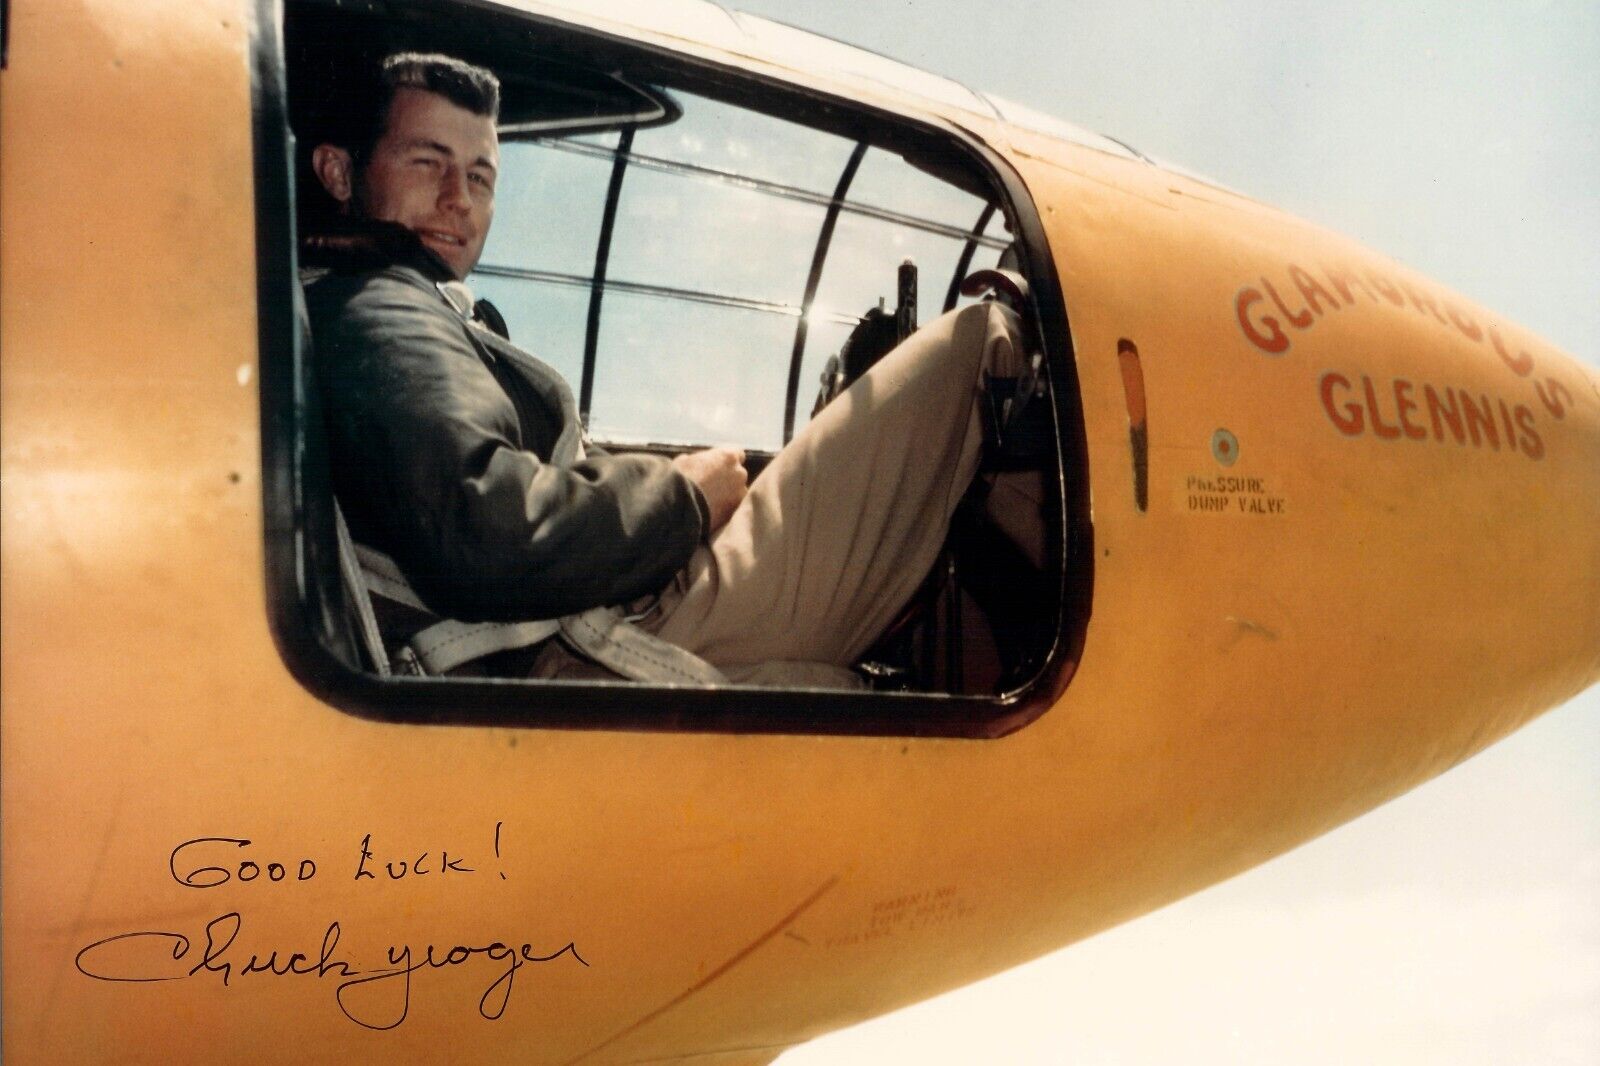 CAPTAIN CHUCK YEAGER IN BELL X-1 COCKPIT GLAMOROUS GLENNIS - 4X6 PHOTO REPRINT